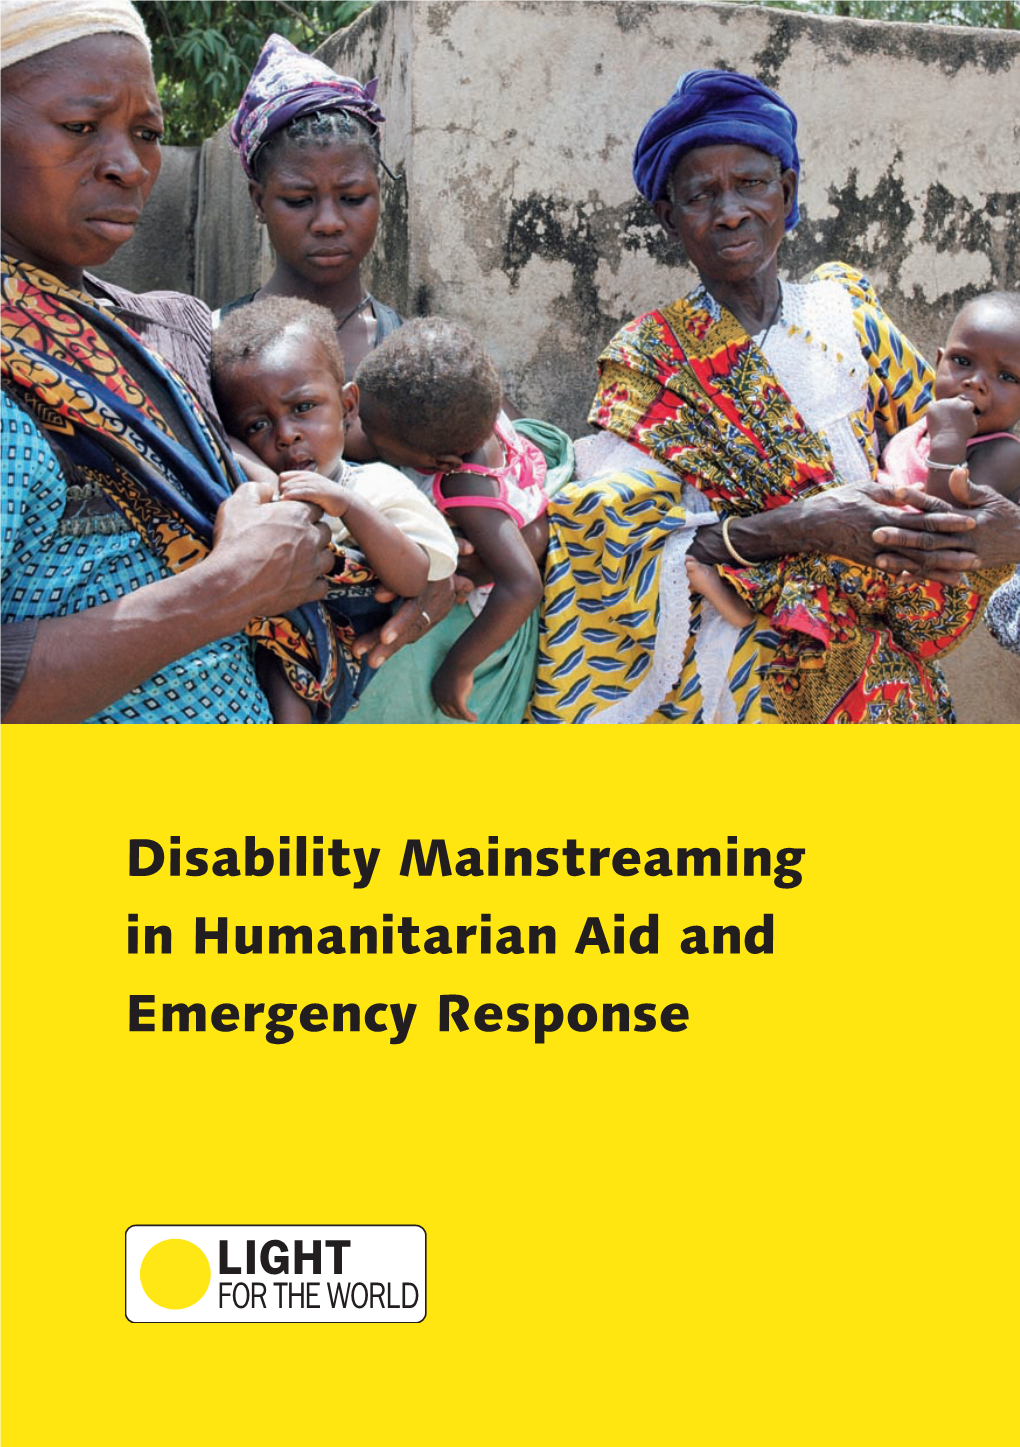 Disability Mainstreaming in Humanitarian Aid and Emergency Response